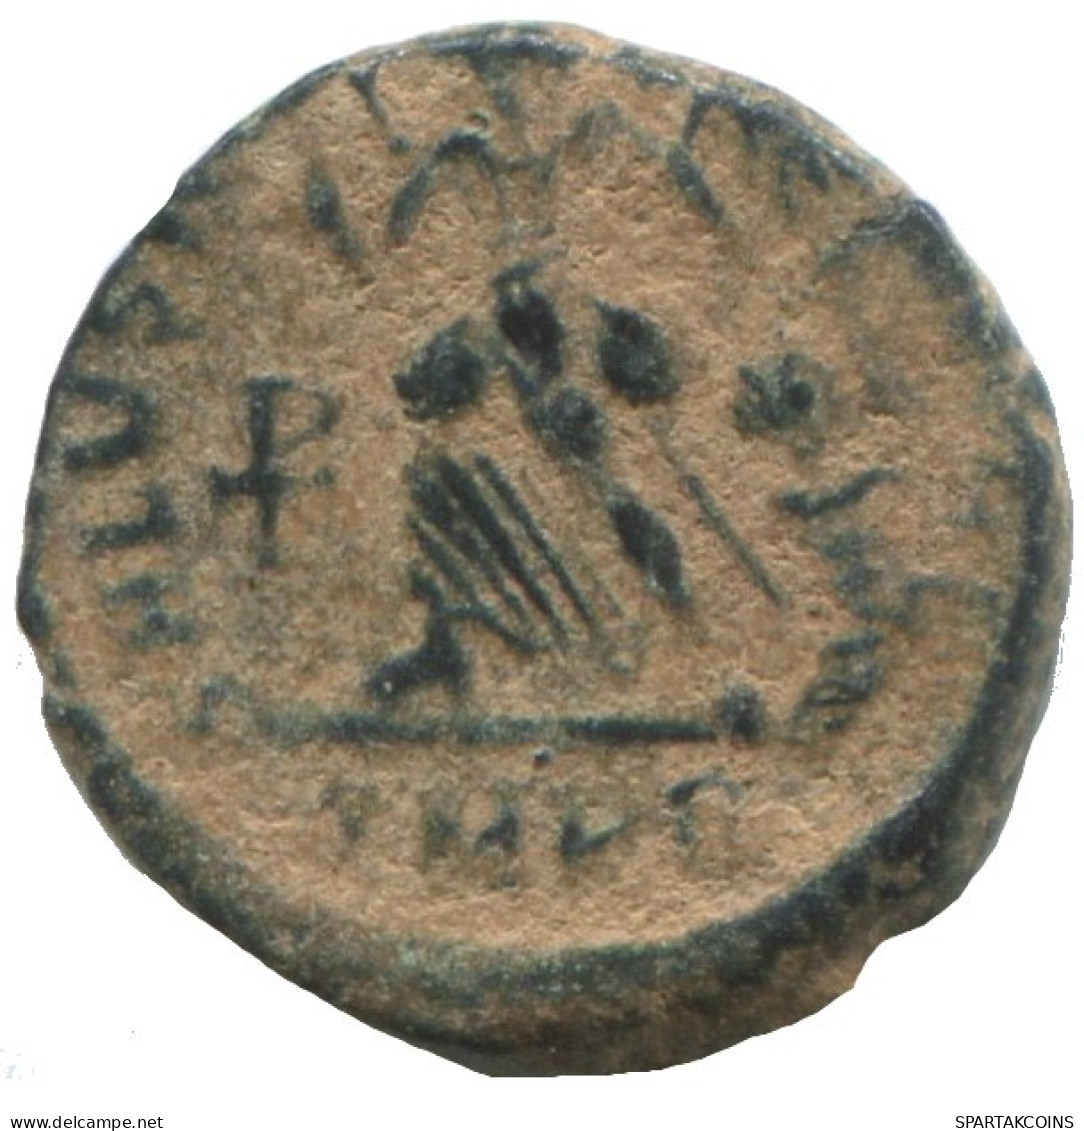 VALENTINIAN II ANTIOCH ANA AD375-392 SALVS REI-PVBLICAE 1.1g/12mm #ANN1386.9.D.A - The End Of Empire (363 AD To 476 AD)